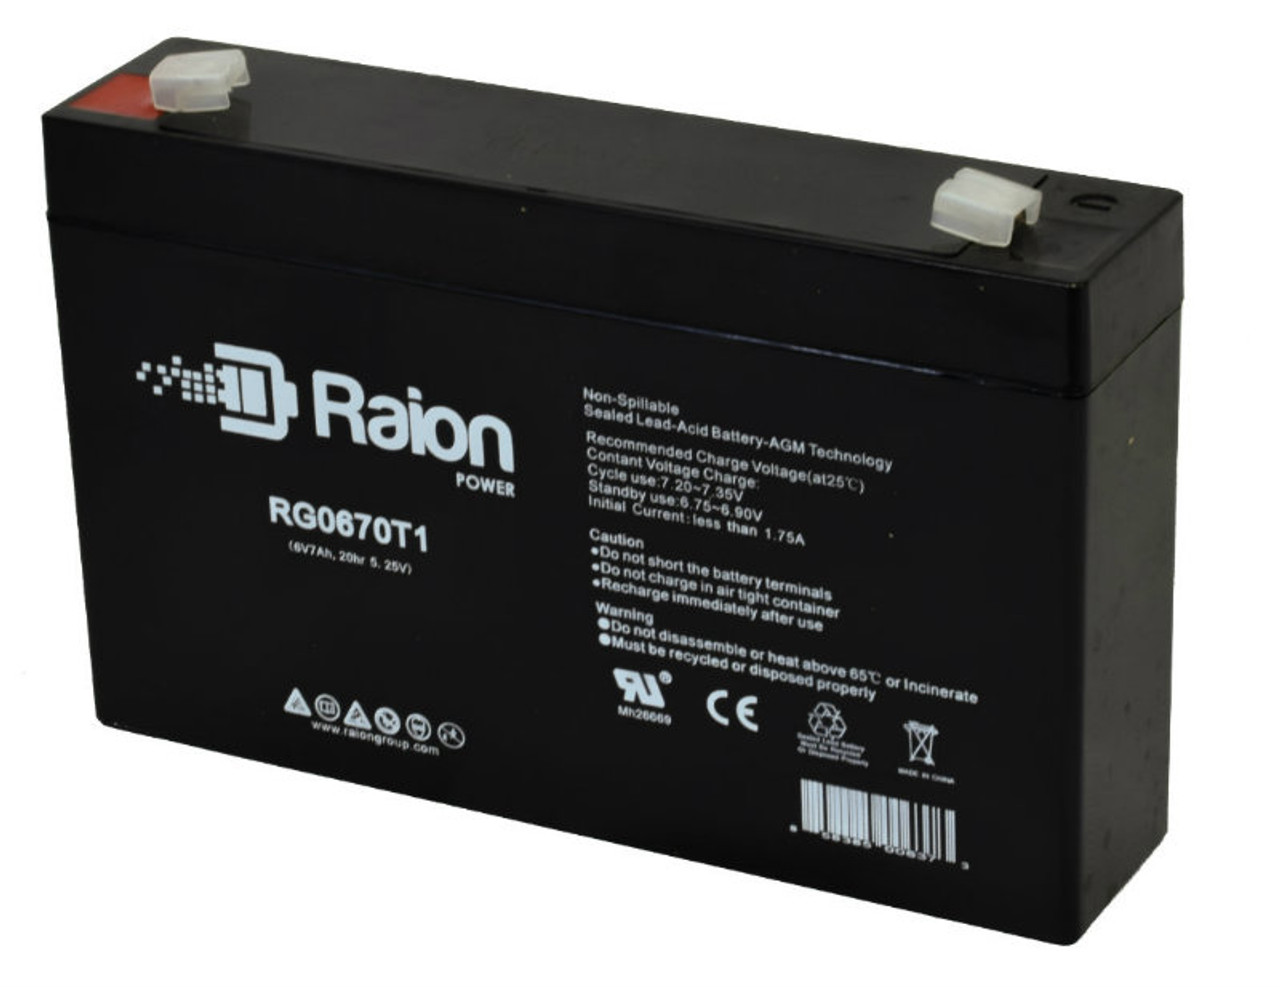 Raion Power RG0670T1 Replacement Battery for Ostar Power OP675 OEM Battery